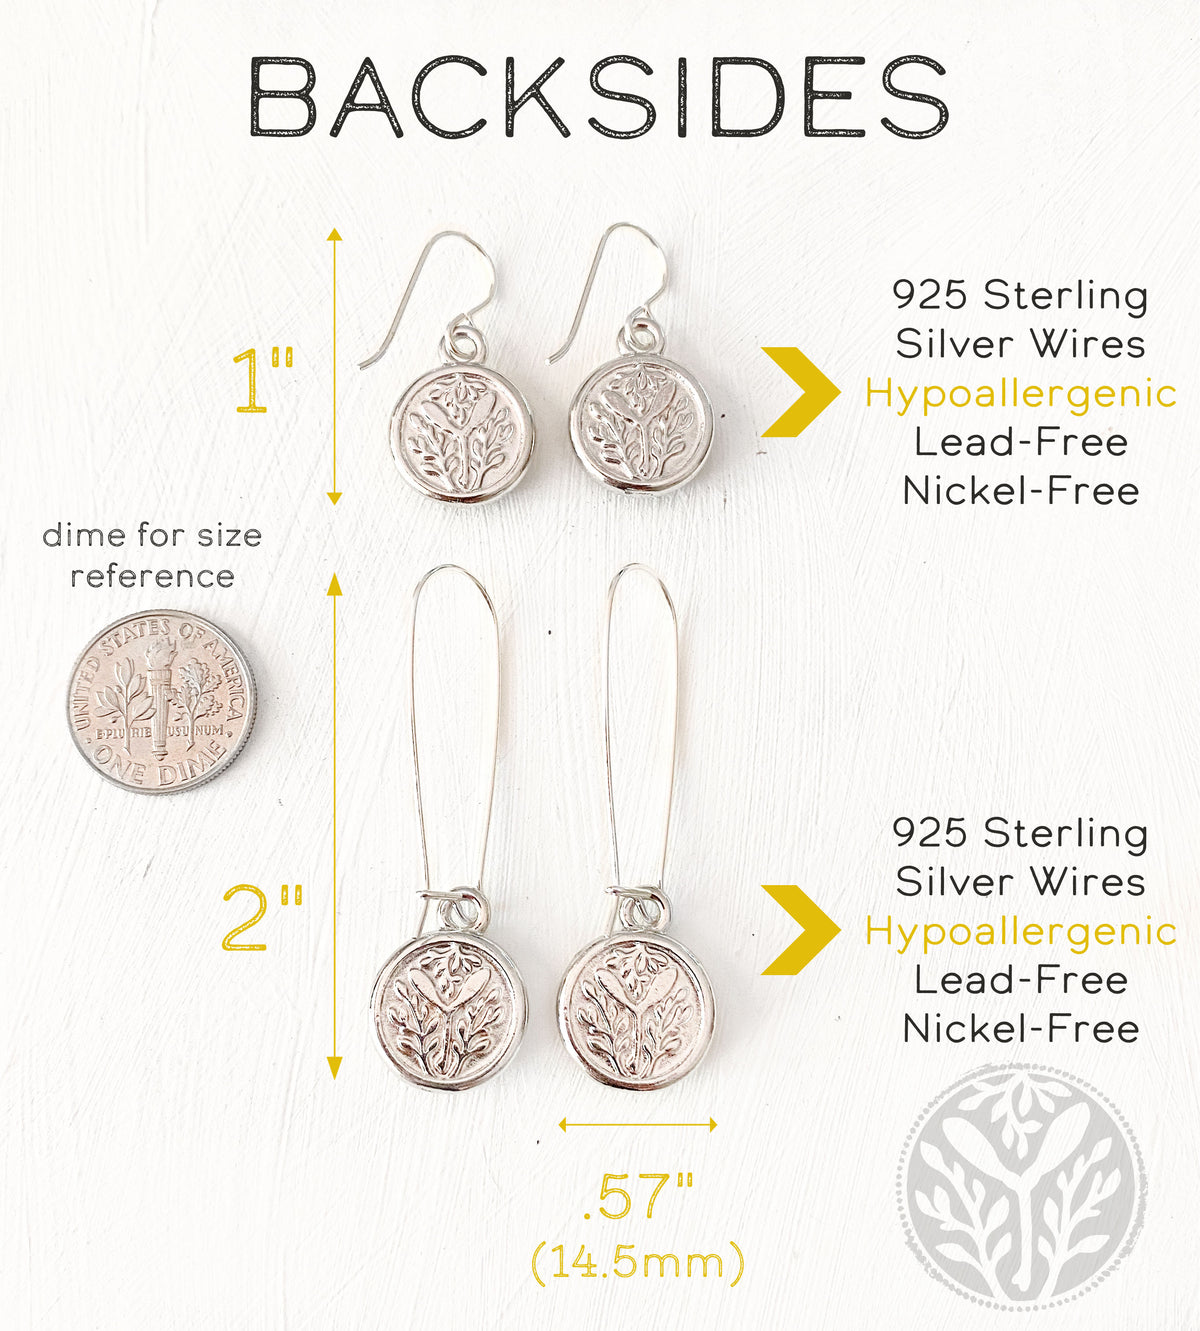 Single Replacement Earring